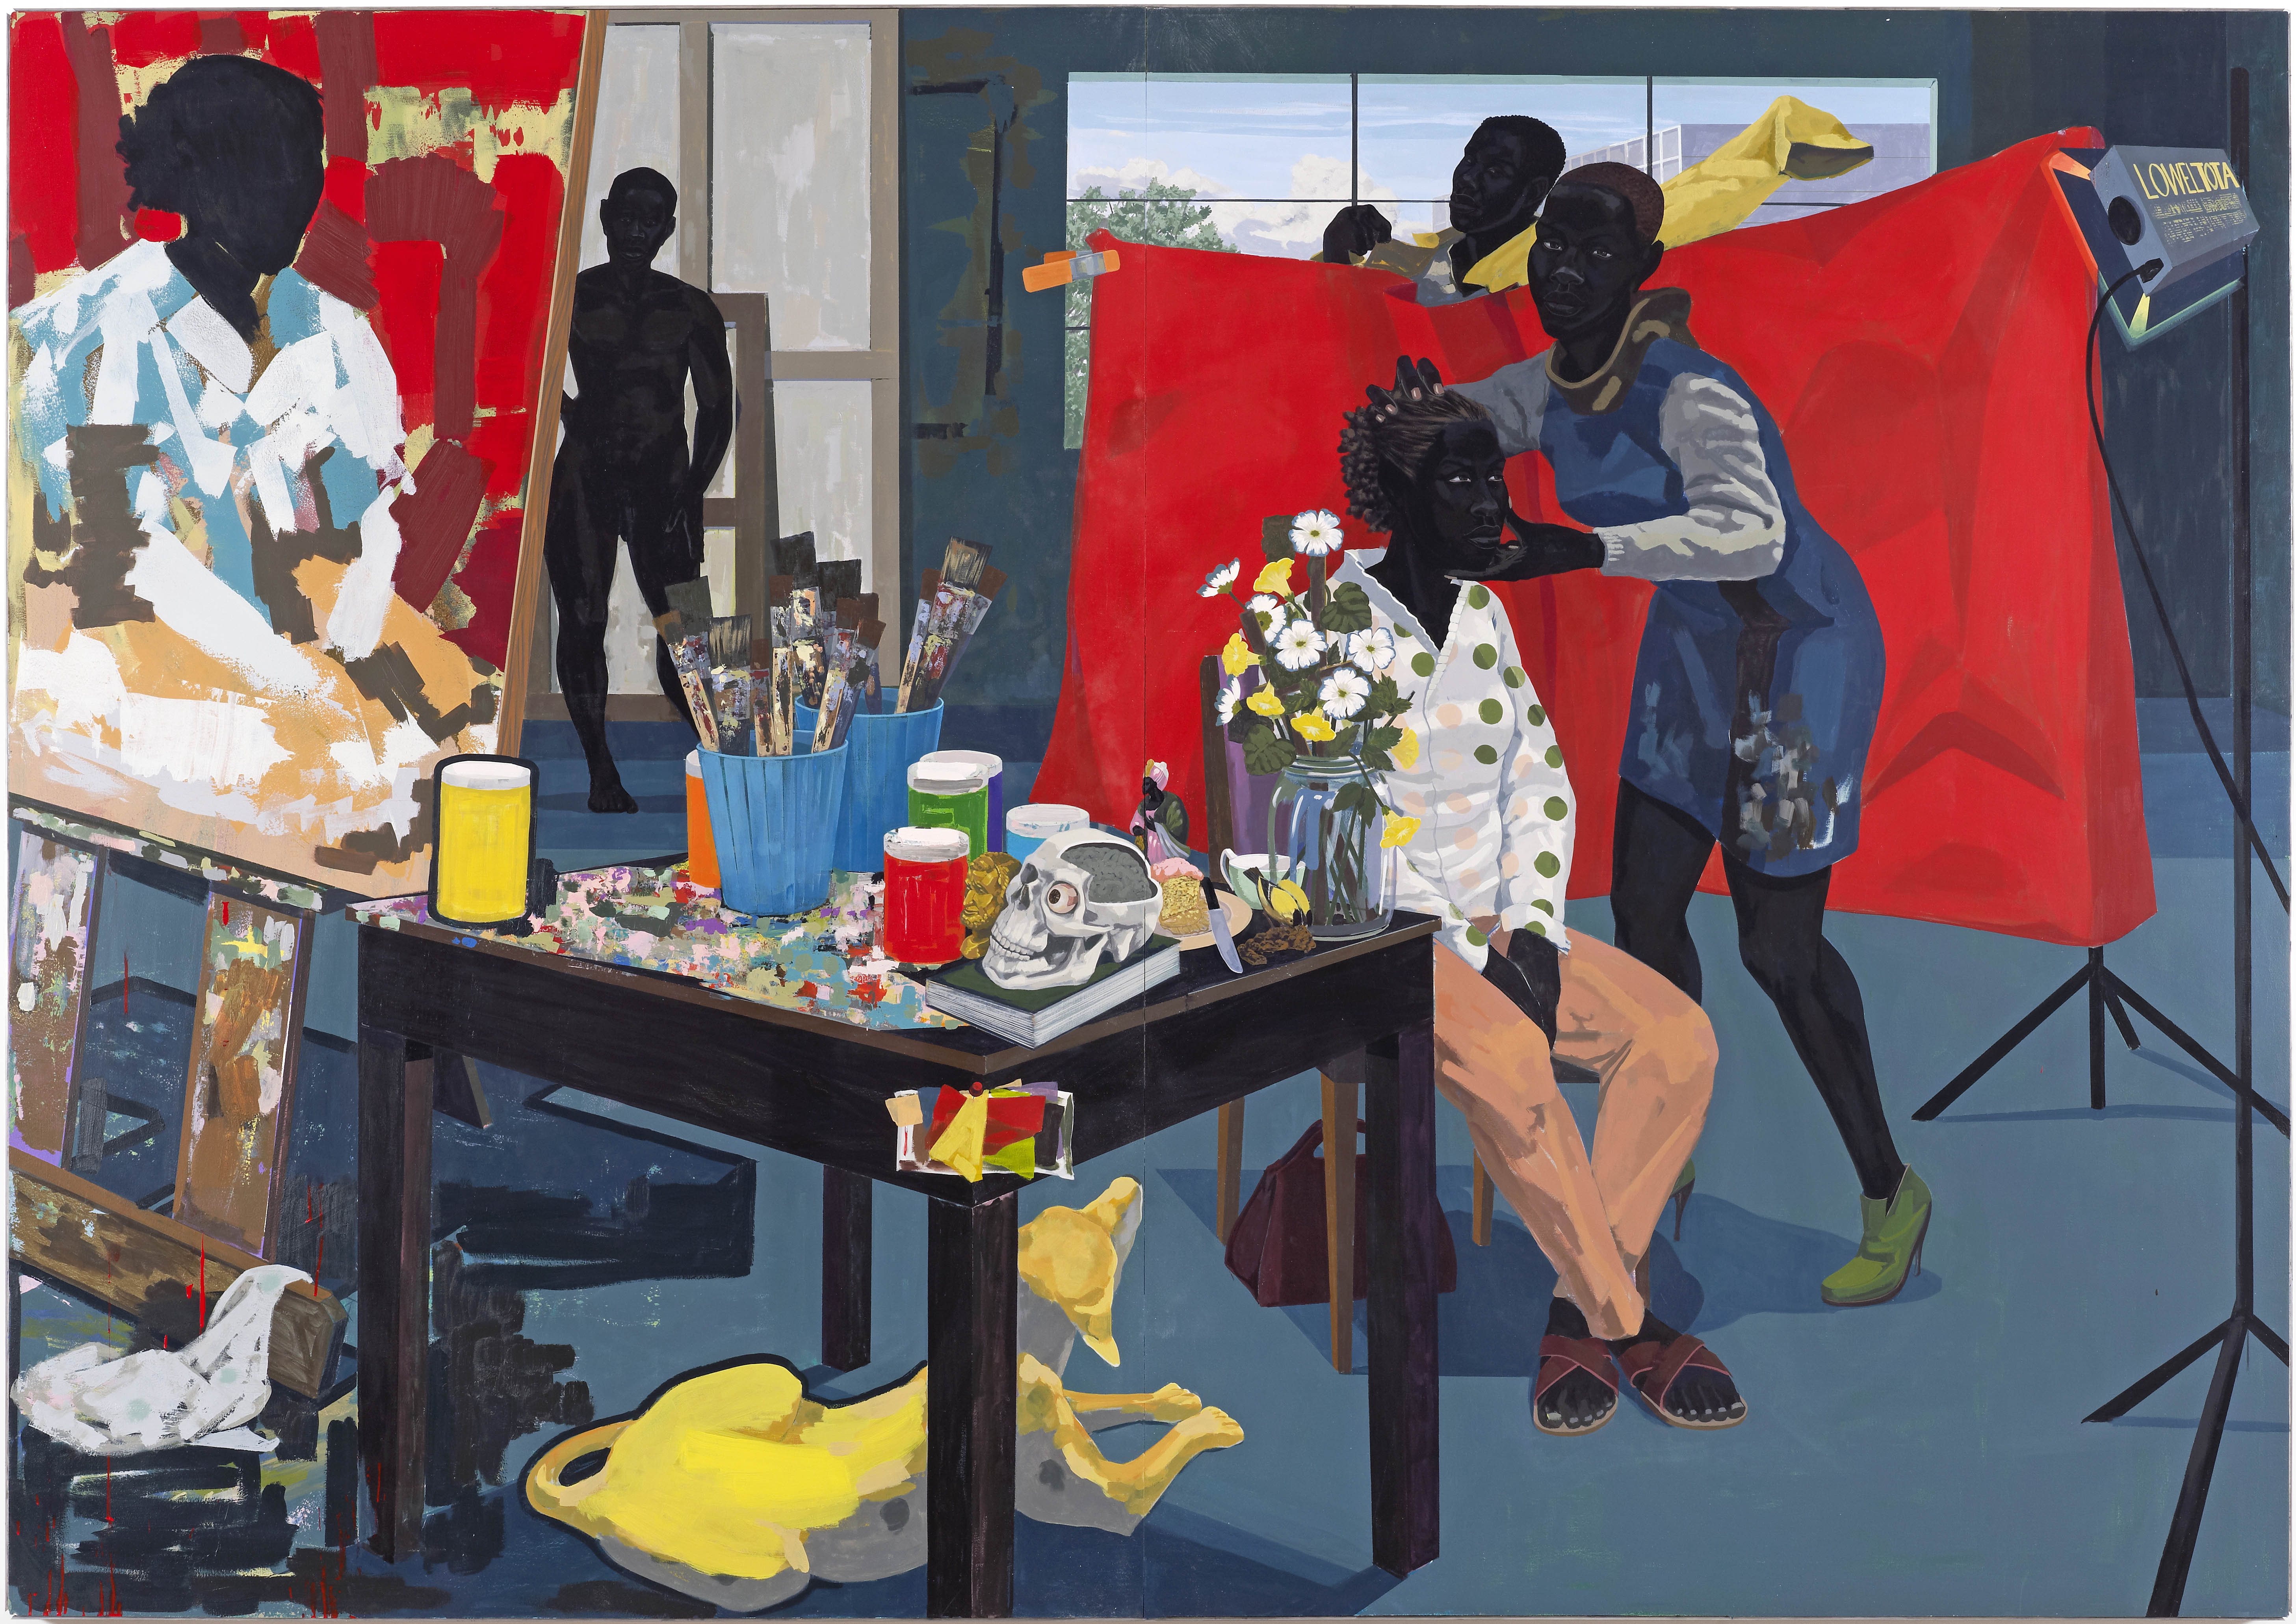 Kerry James Marshall, Untitled (Studio), 2014. (Purchase, The Jacques and Natasha Gelman Foundation Gift, Acquisitions Fund and The Metropolitan Museum of Art Multicultural Audience Development Initiative Gift, 2015, )